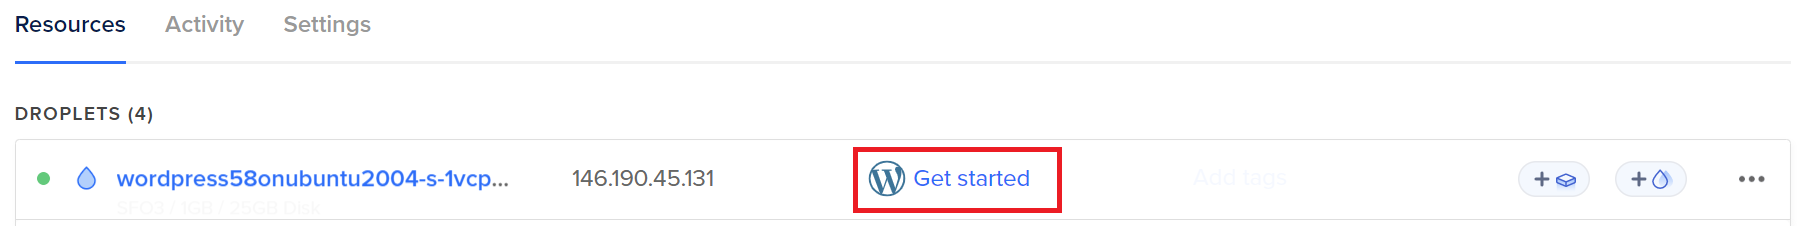 Press on the Get started button to view the guide